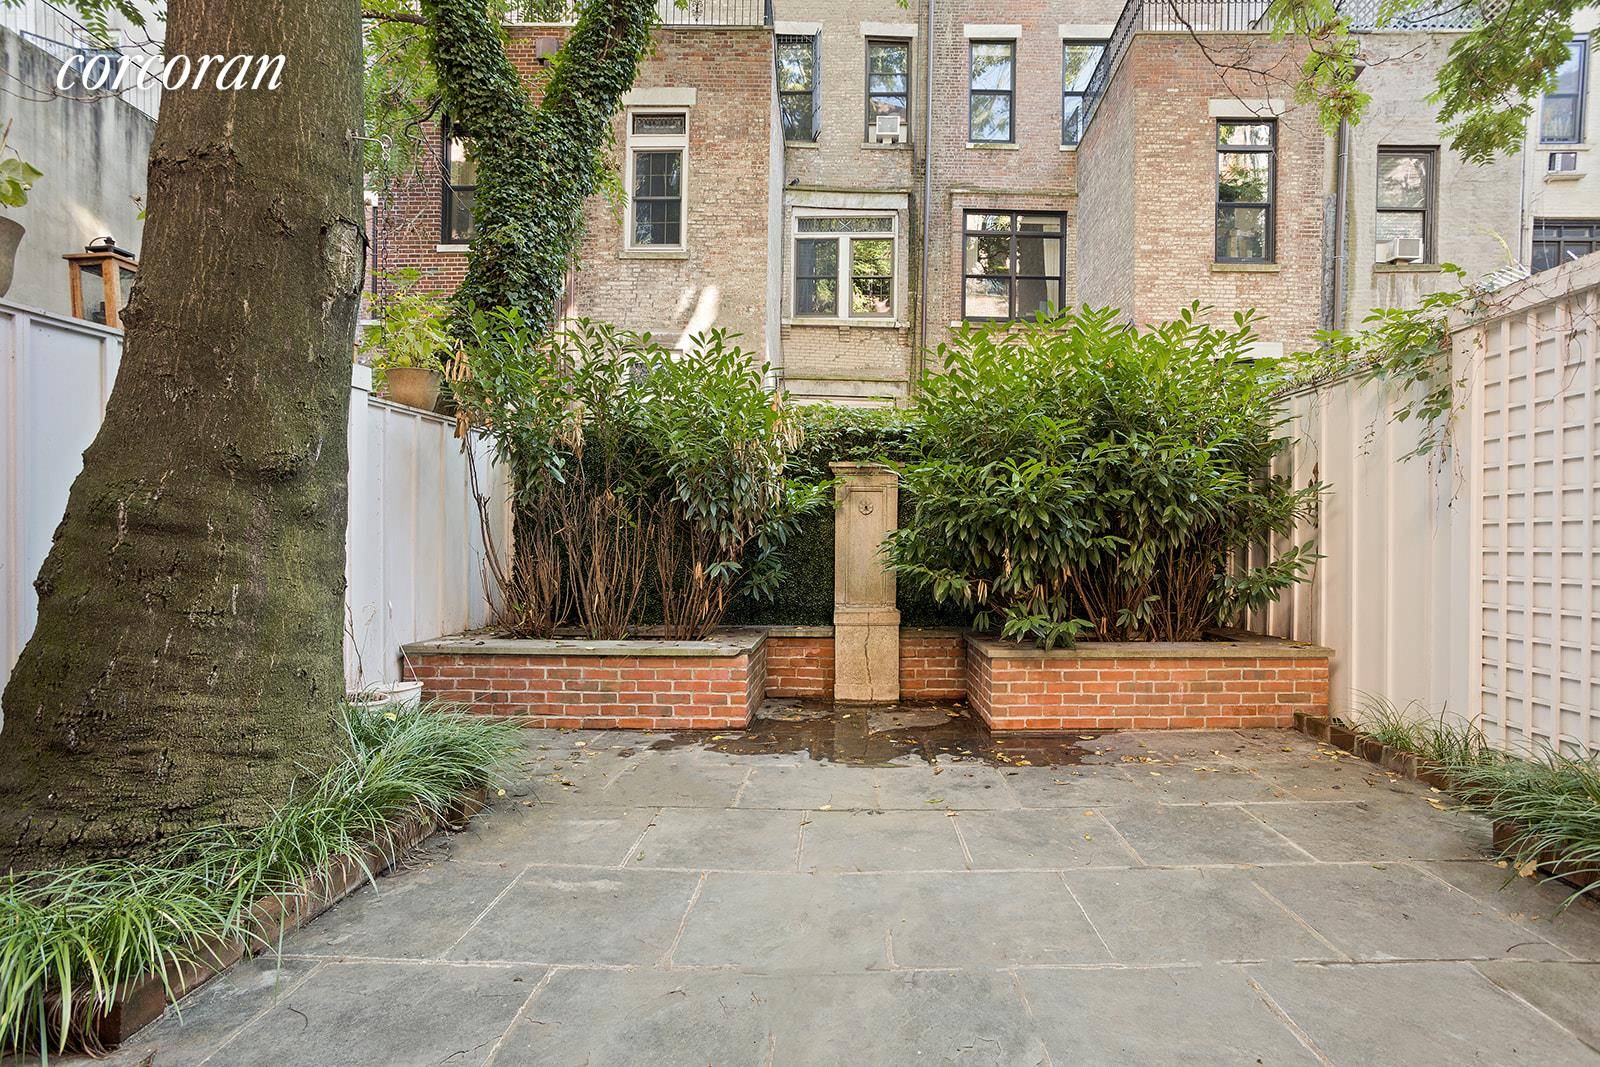 Located just half a block from Central Park, this sublime townhouse, located on a tree lined block, is the epitome of Upper West Side living.